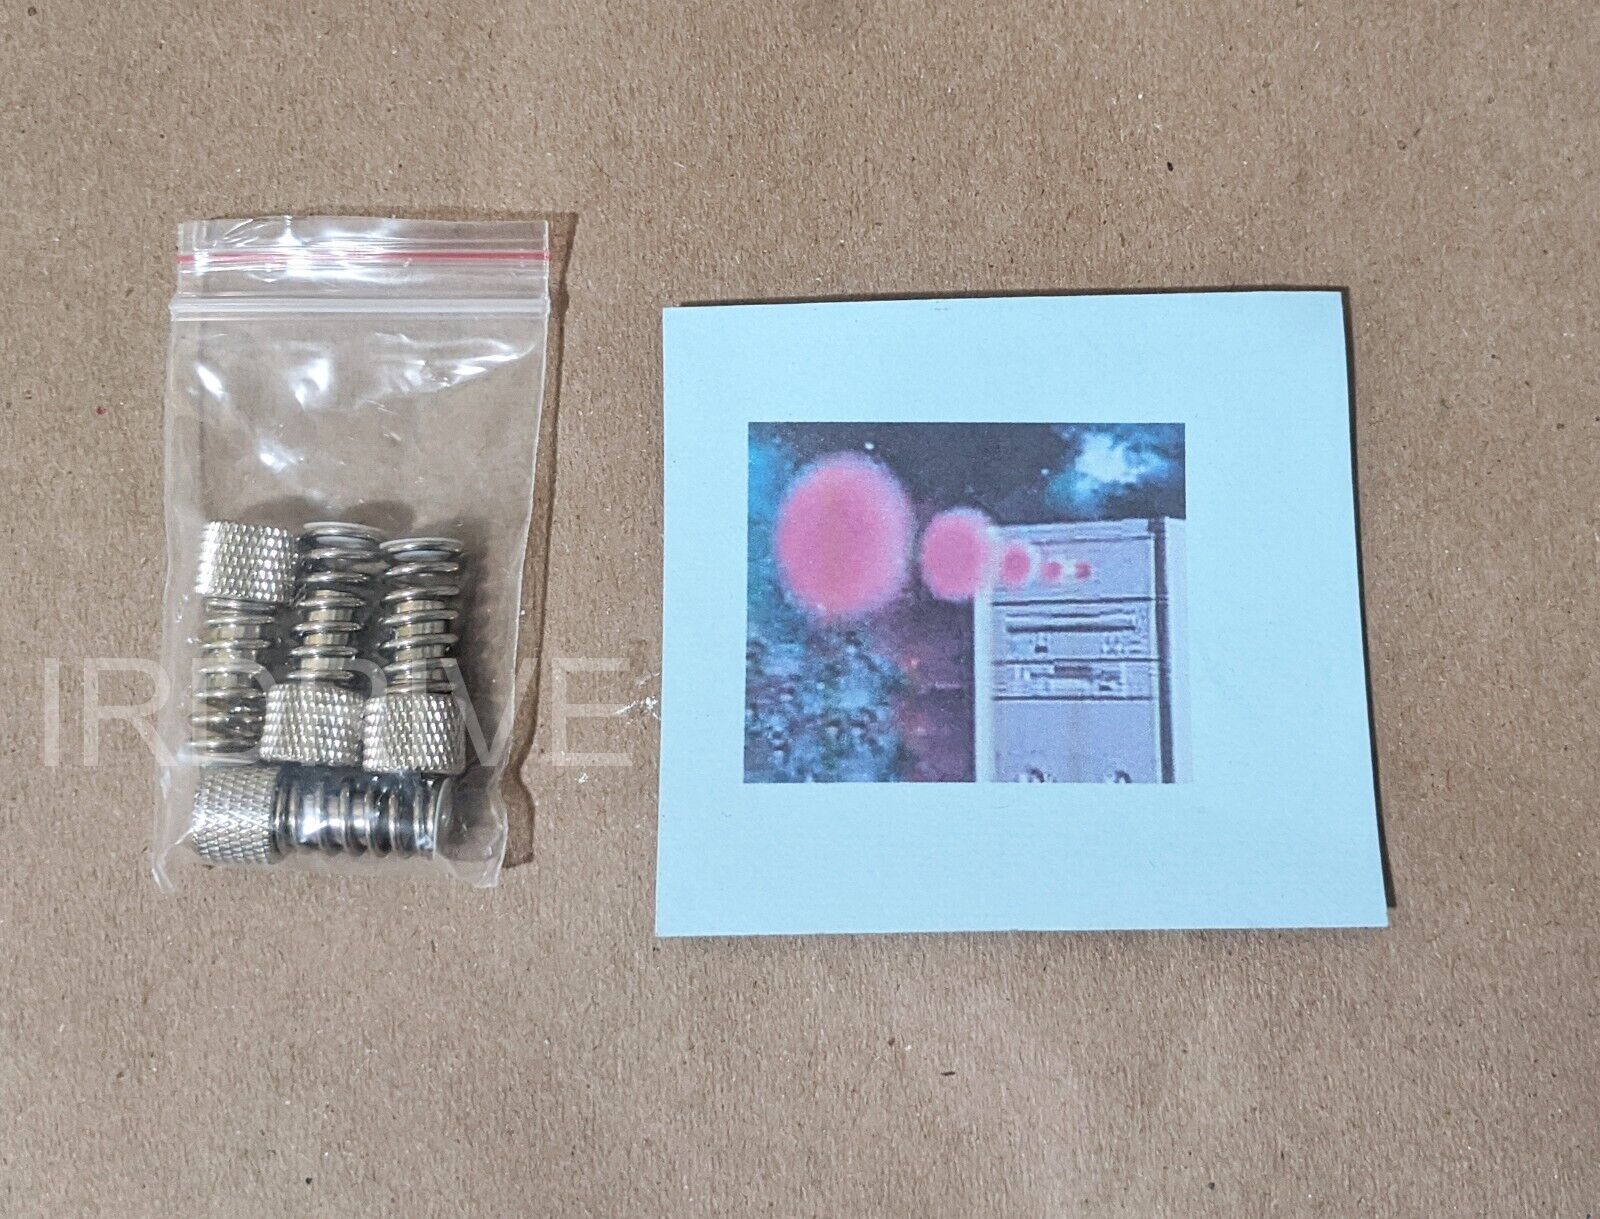 Lot 4: Evercool Mounting Screws ONLY for Low Profile 1U LGAL-710CA CPU Cooler